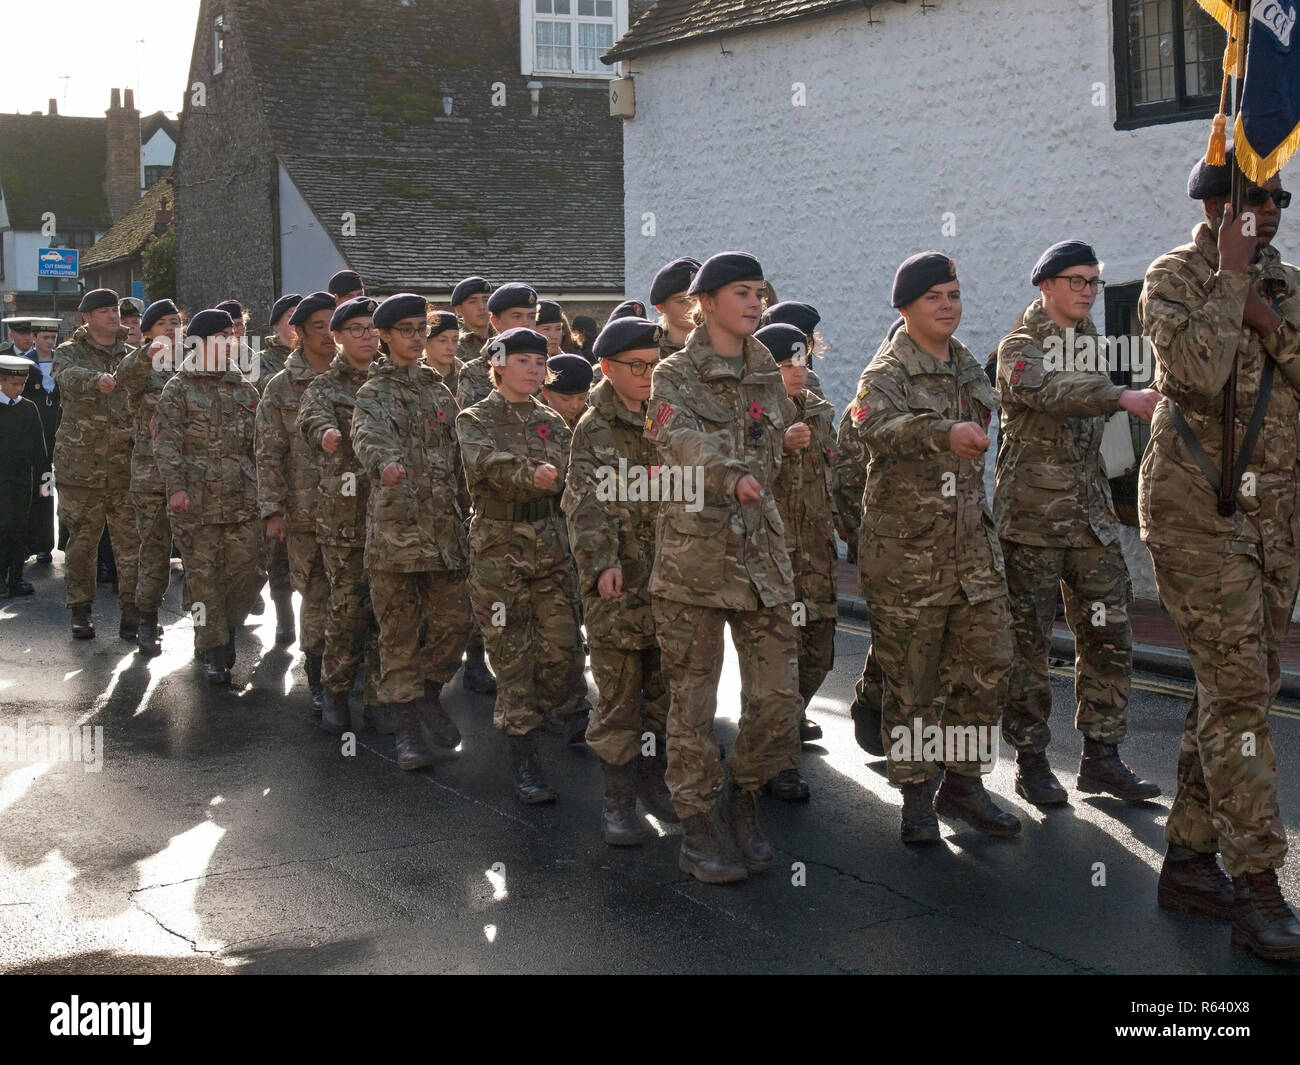 Members of the Army Cadet Force march through the village of Rottingdean on Remembrance Day Stock Photo